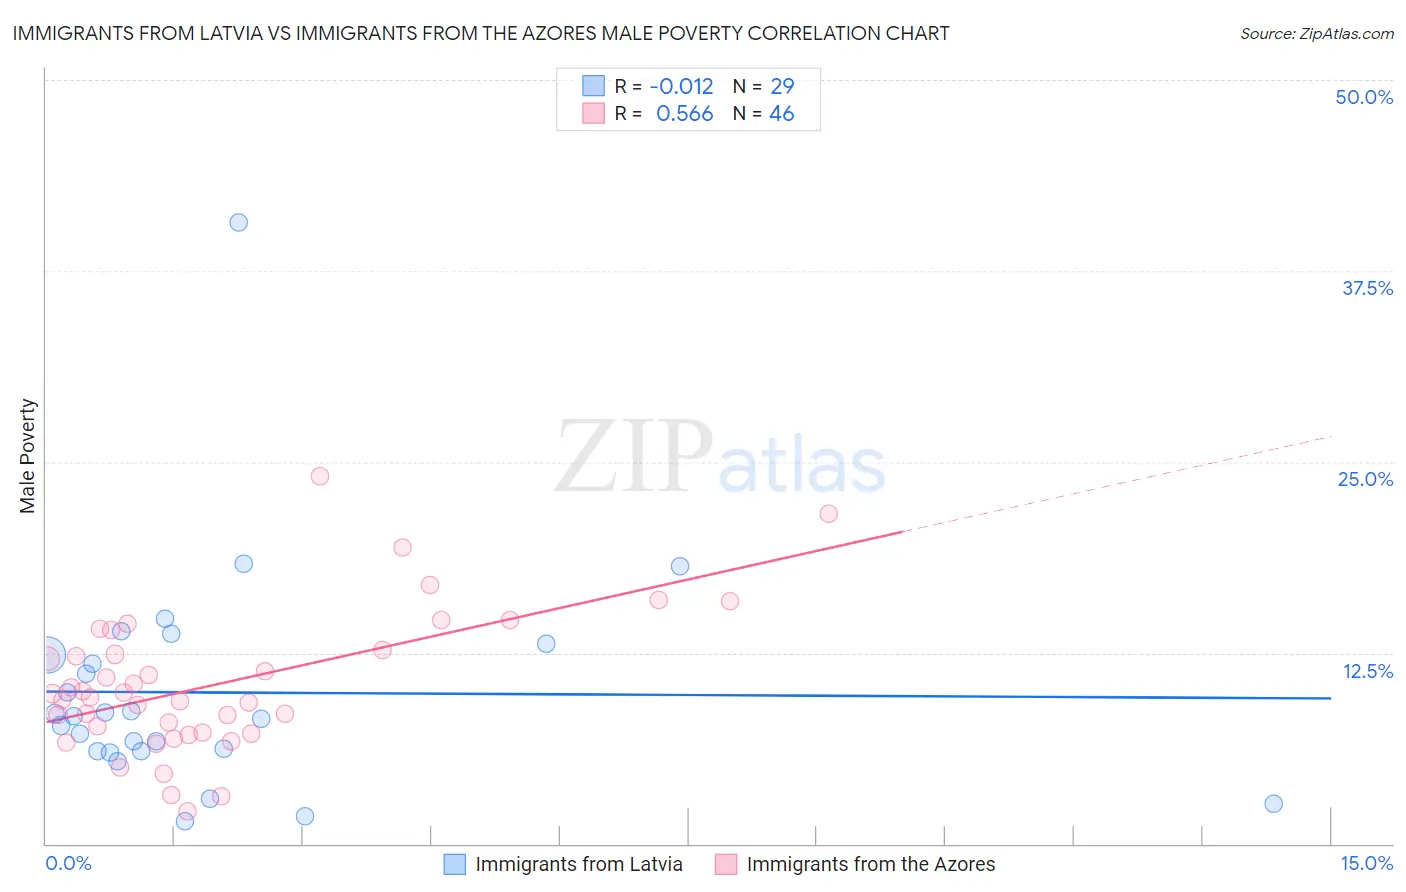 Immigrants from Latvia vs Immigrants from the Azores Male Poverty